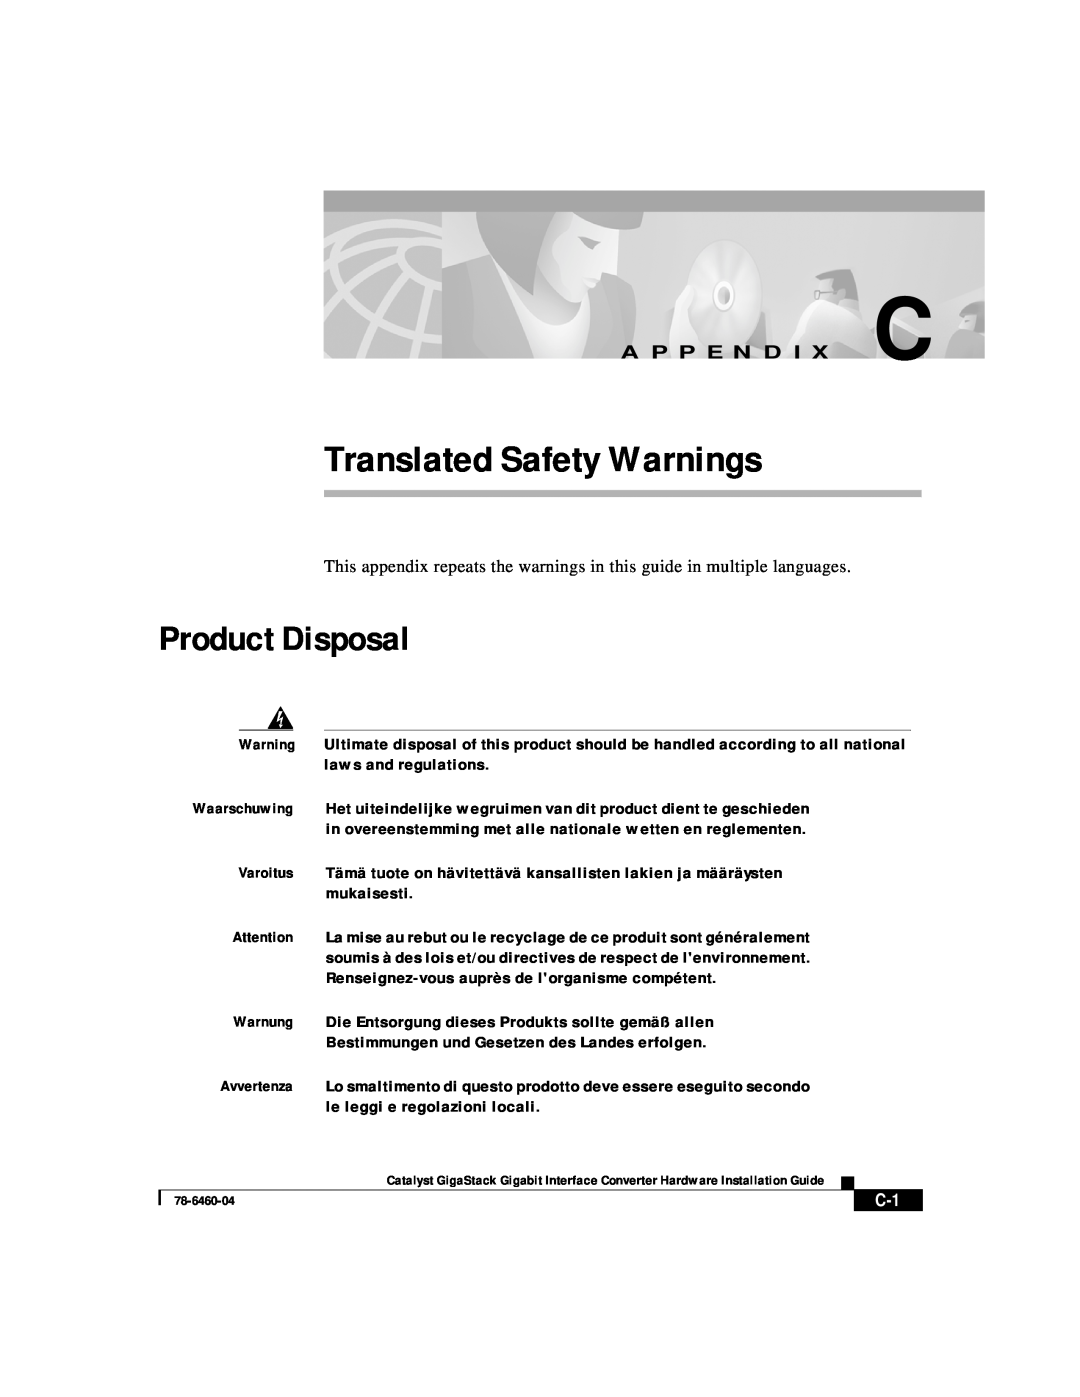 Cisco Systems WS-X3500-XL manual Translated Safety Warnings, Product Disposal, A P P E N D I X C 